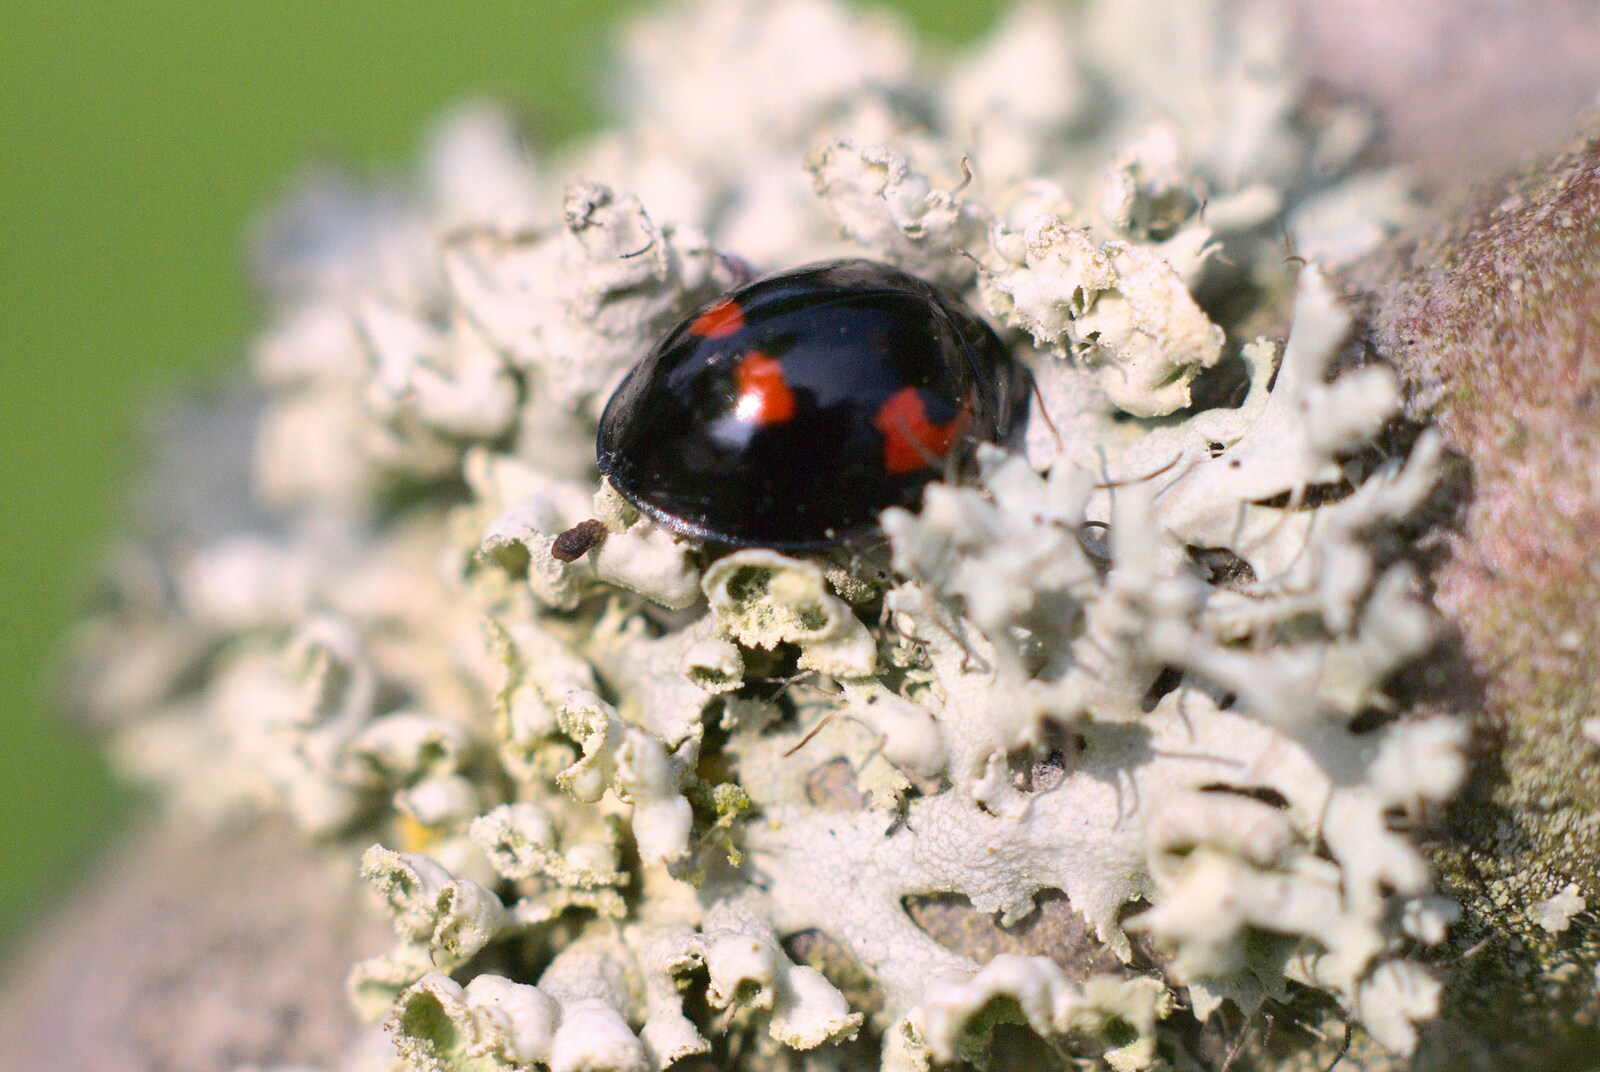 A black ladybird with red spots from Bubbles and Macro Fun, Brome, Suffolk - 17th April 2011